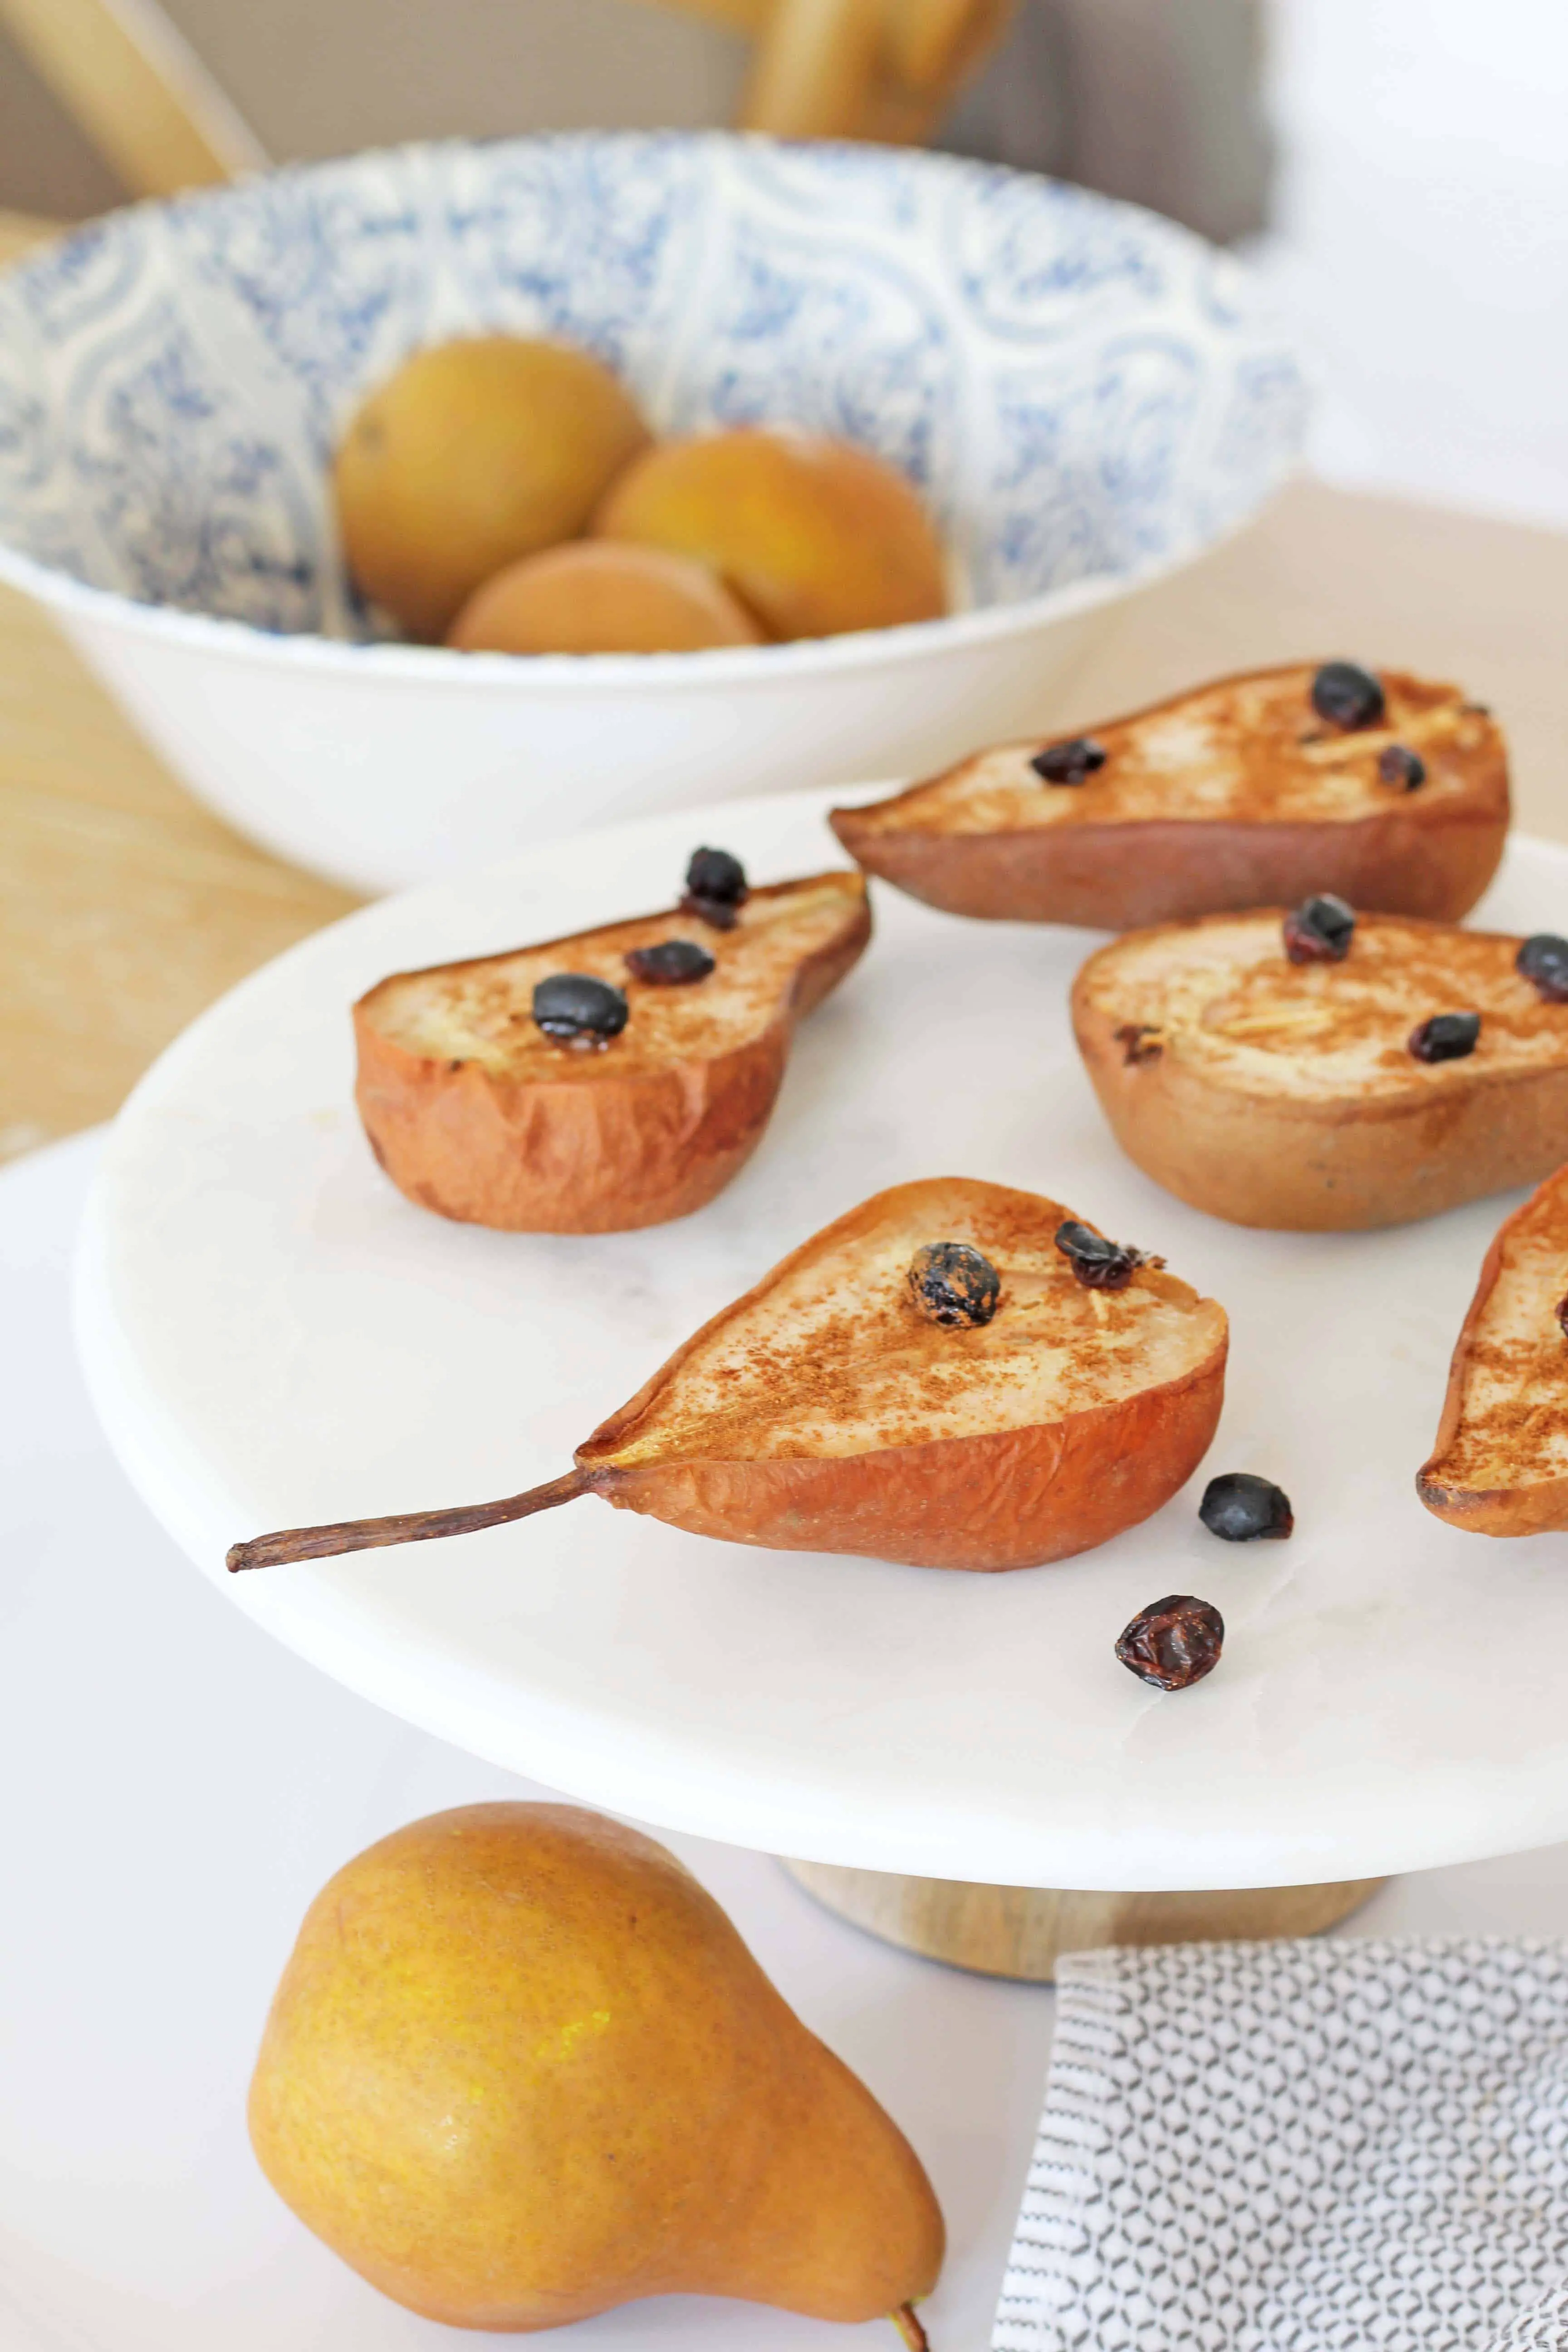 Baked cinnamon pear with currants recipe.